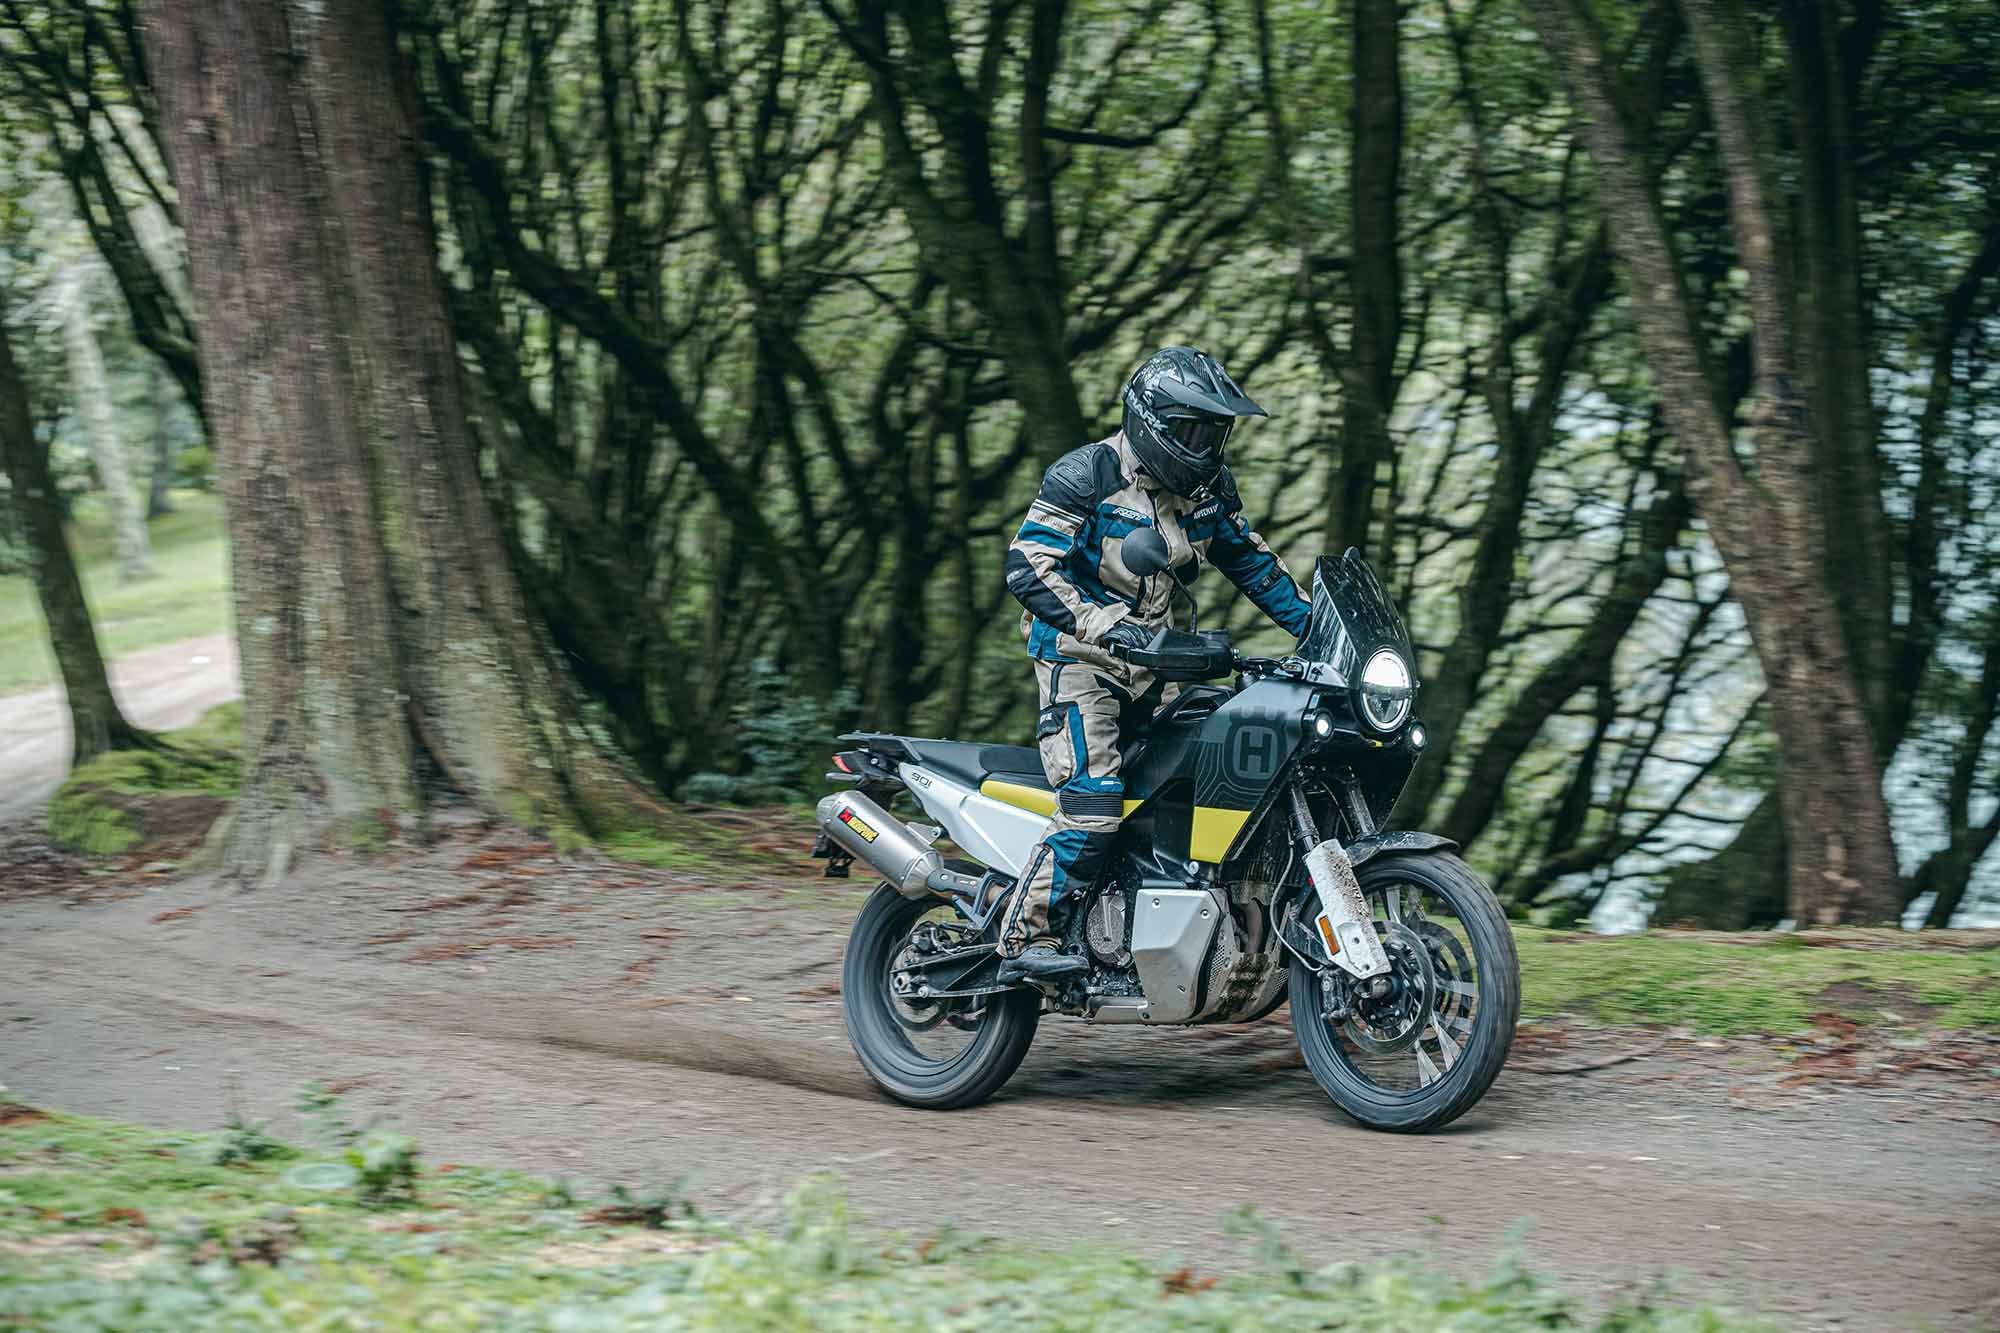 The dedicated adventure riding kit looks good and, according to the guys who rode with us, waterproof.